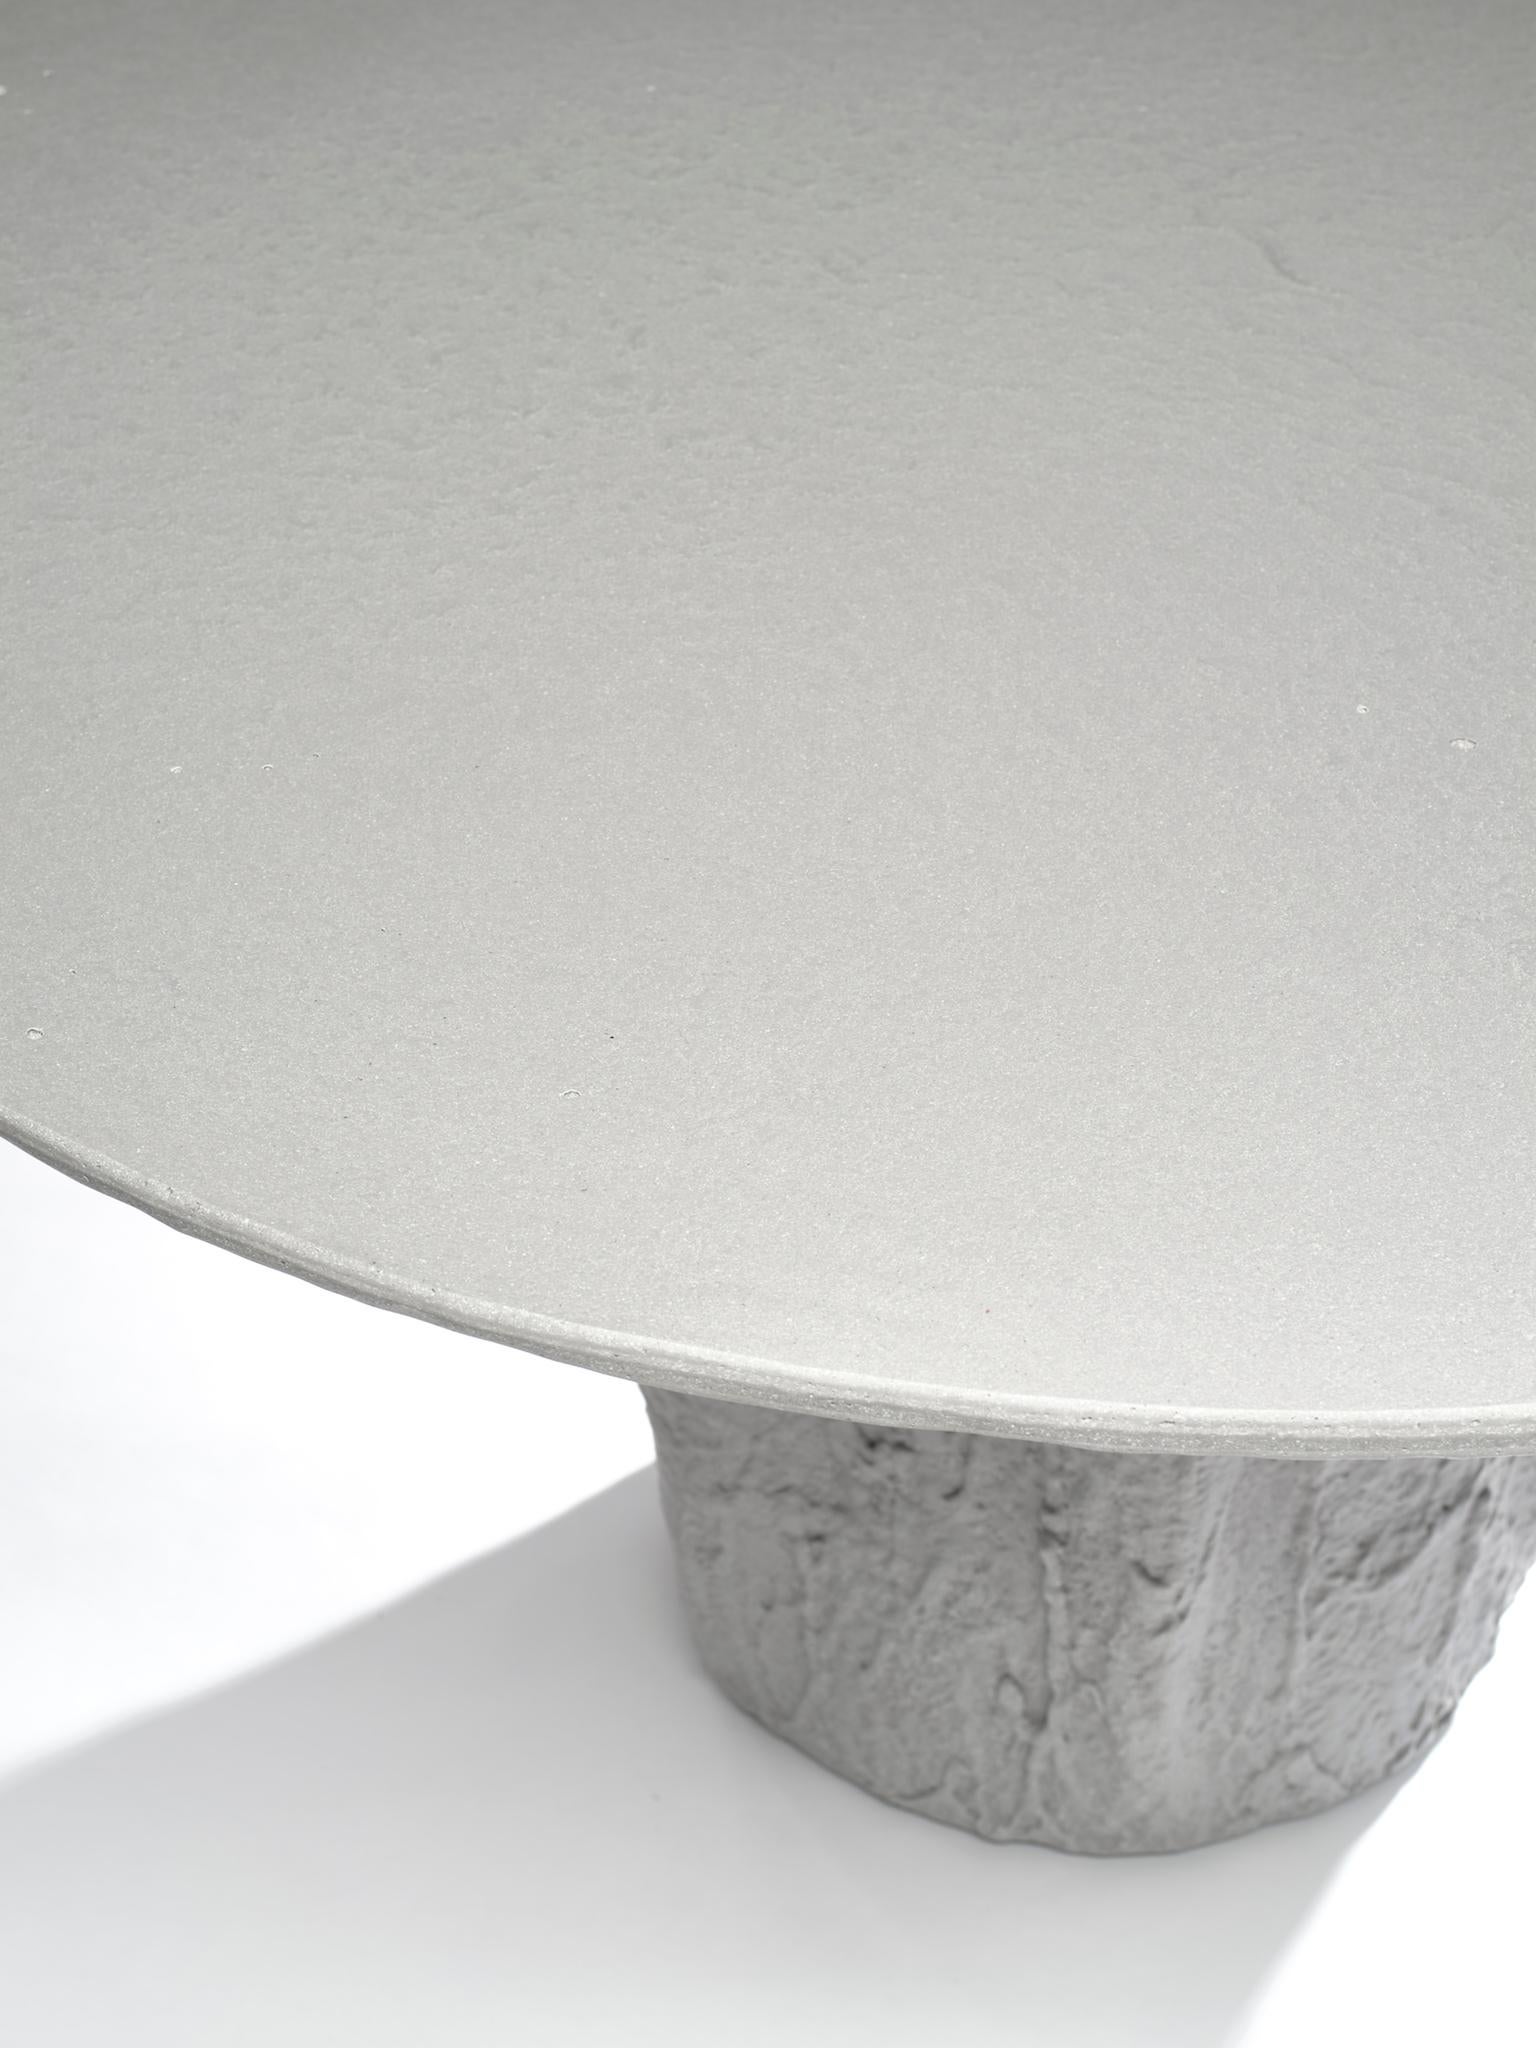 Modern Light Grey Model Table by Gio Minelli for Superego Editions, Italy For Sale